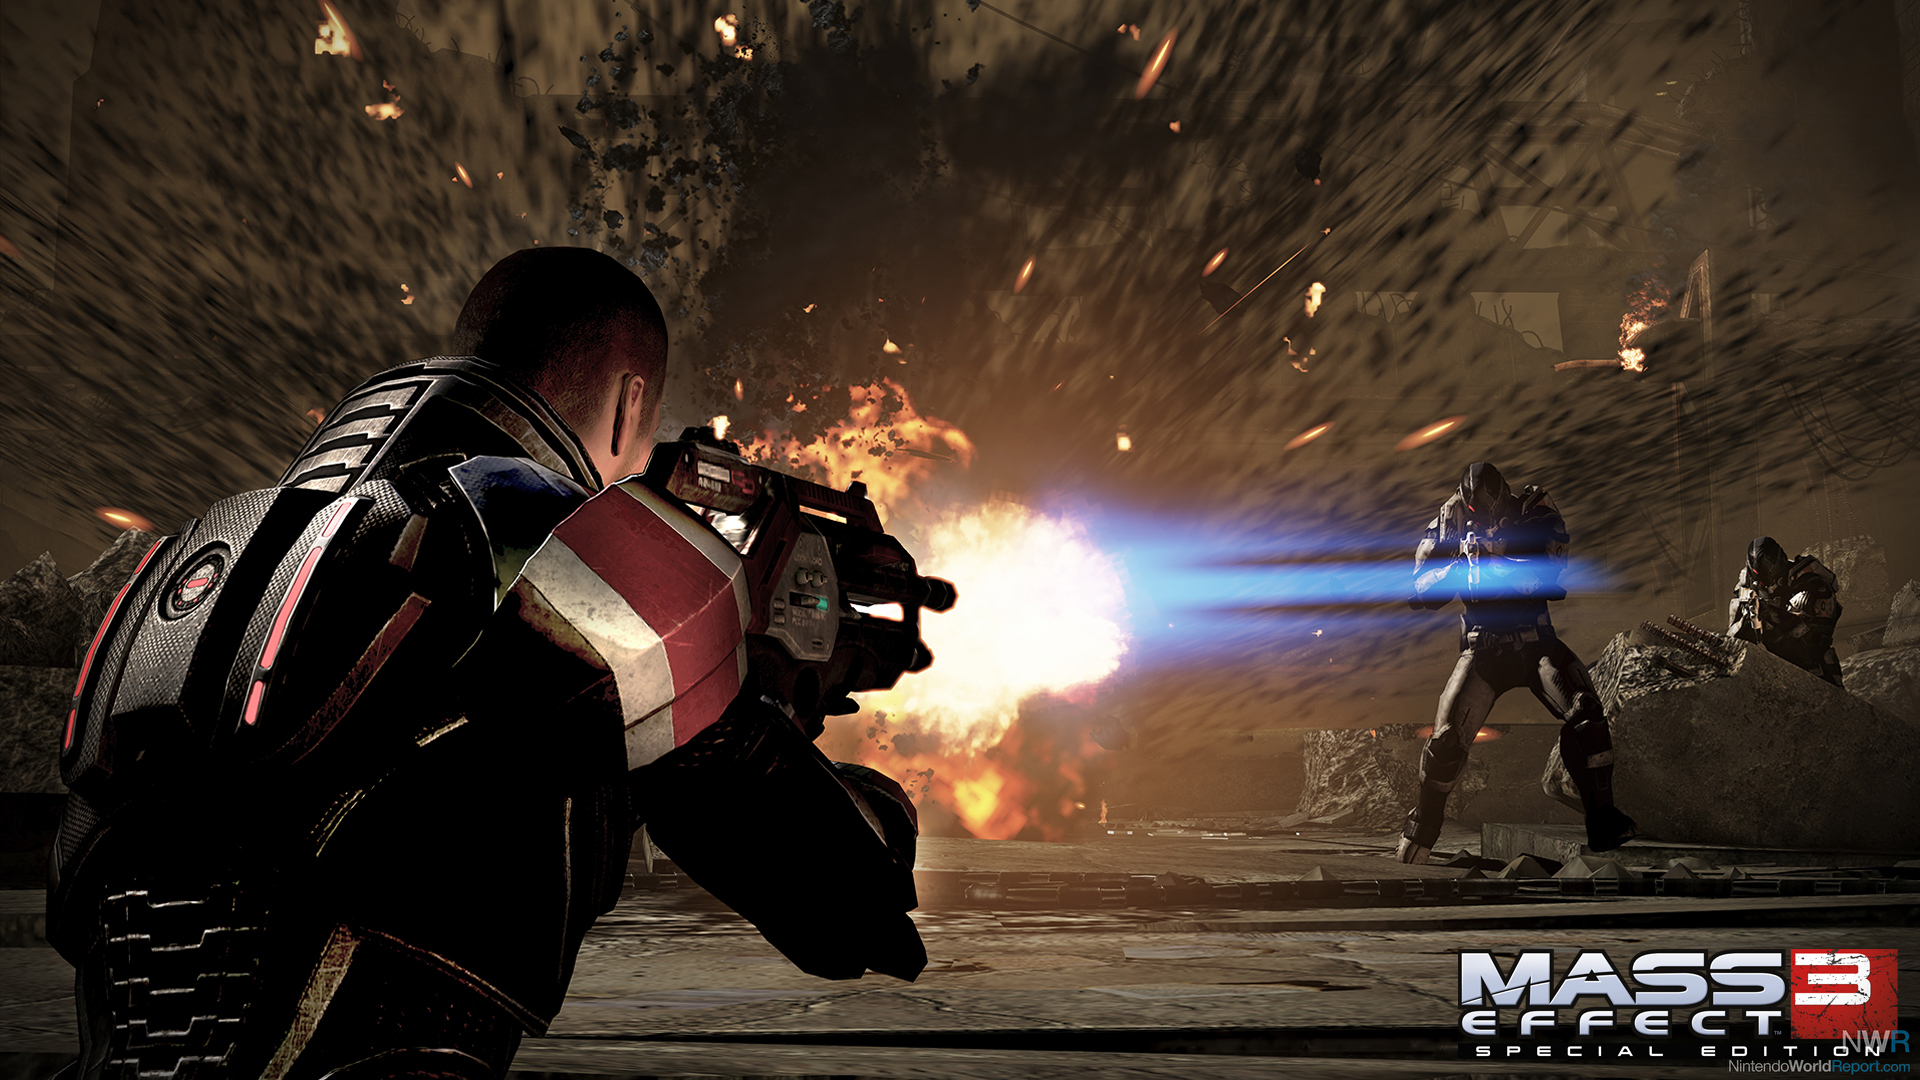 Mass Effect 3: Special Edition Review - Review - Nintendo World Report